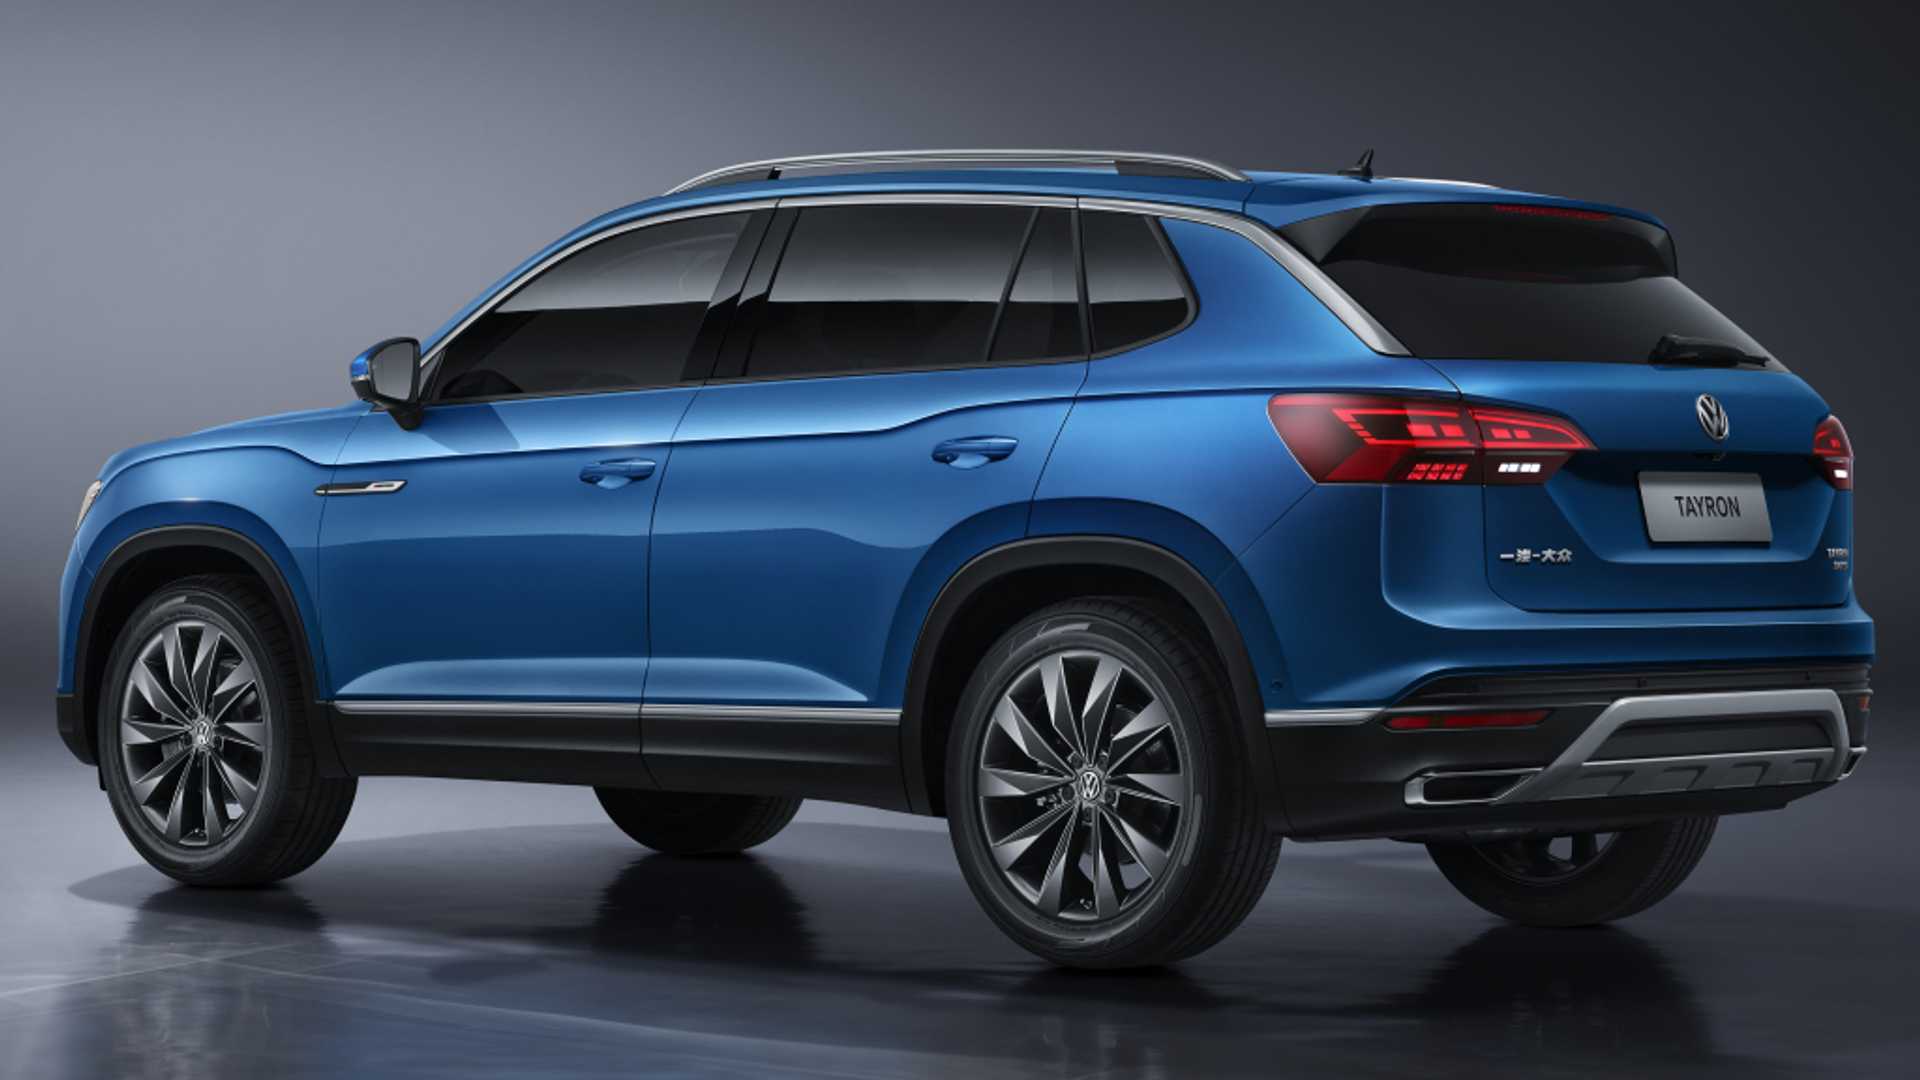 Should the Volkswagen Tayron SUV come to India and replace Tiguan